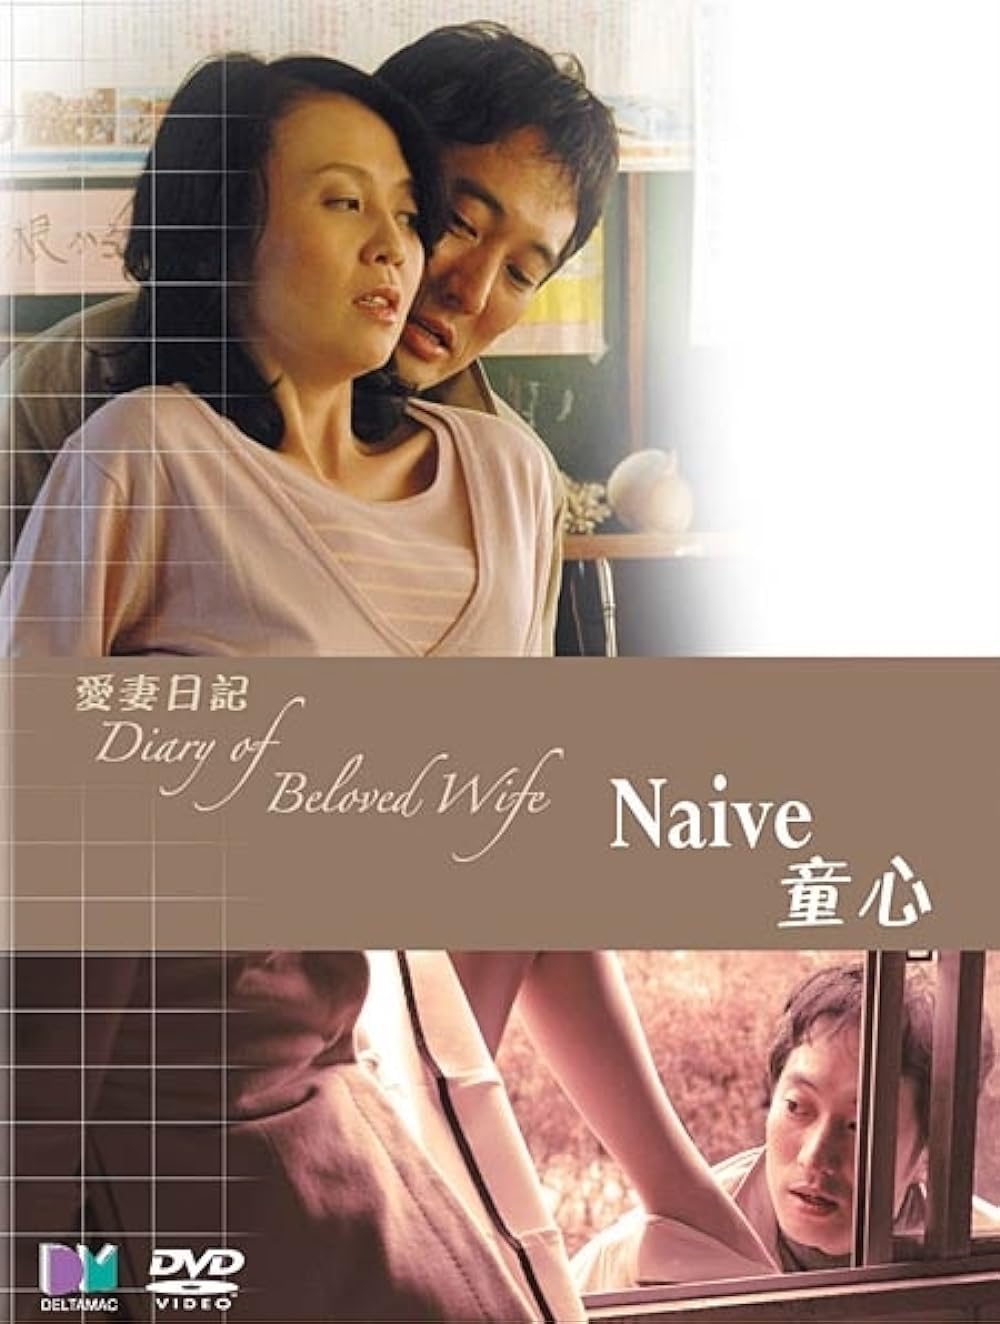 18+ Diary of Beloved Wife Naive 2006 Japanese 480p HDRip 250MB Download